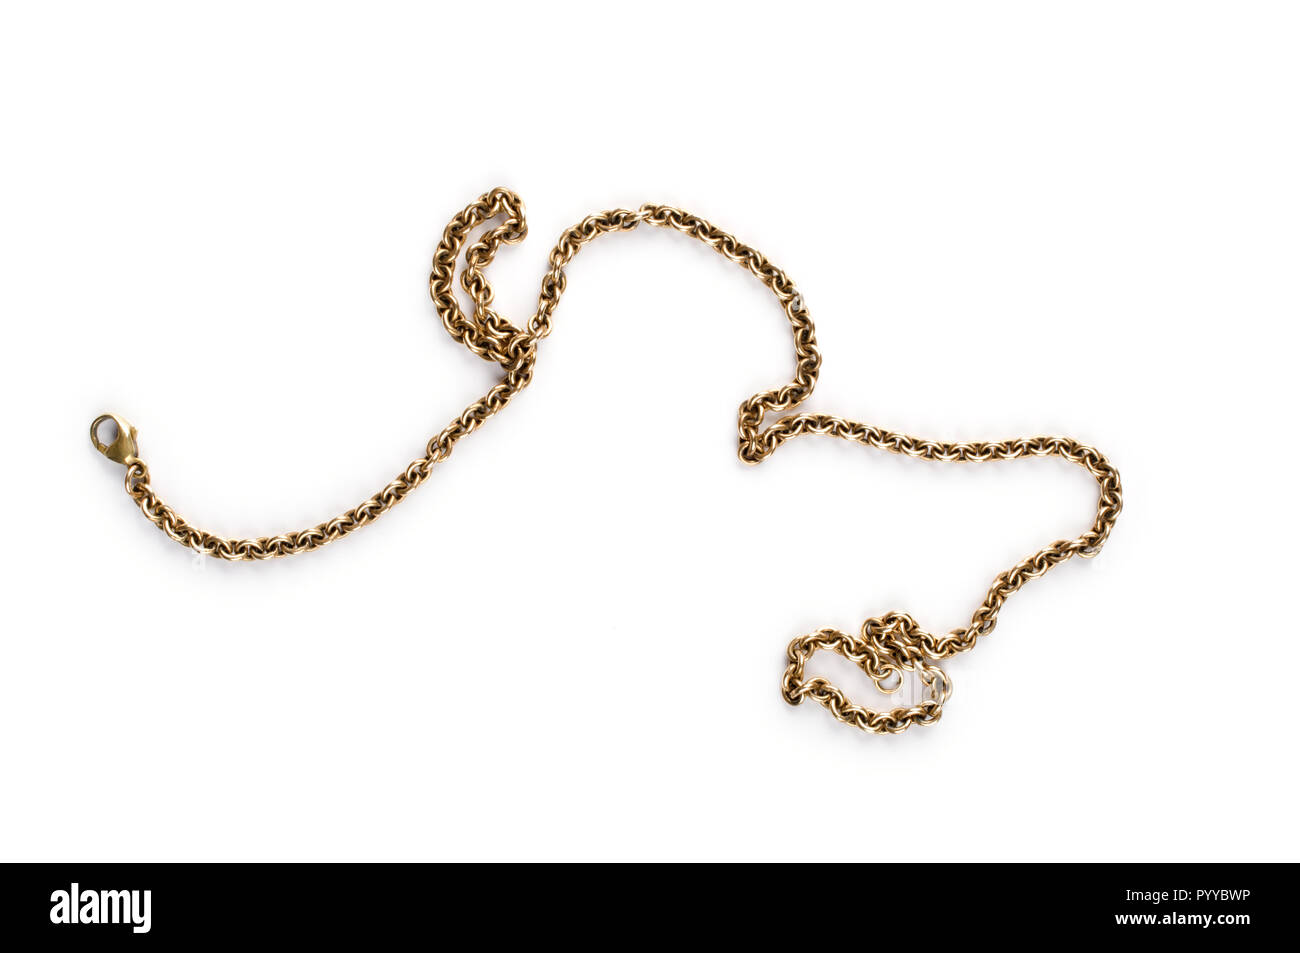 Gold chain on white background. Stock Photo